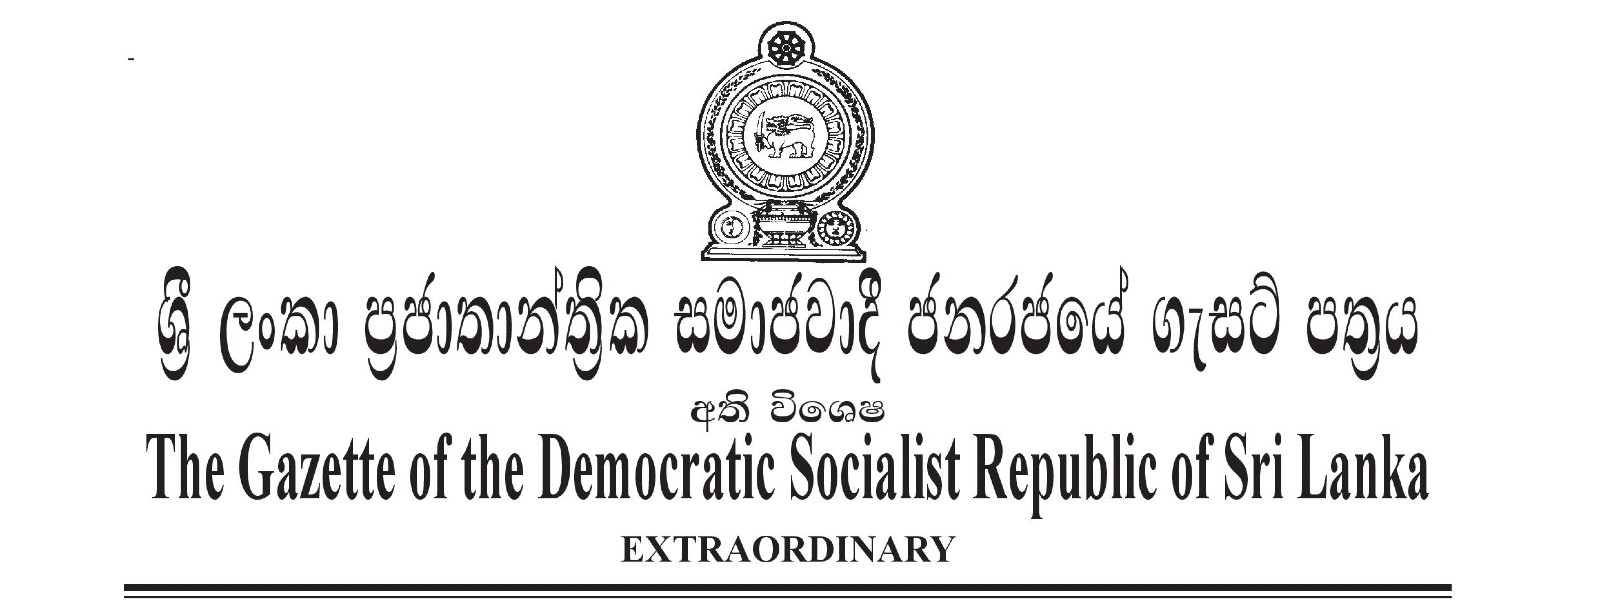 Two Secretaries appointed by President